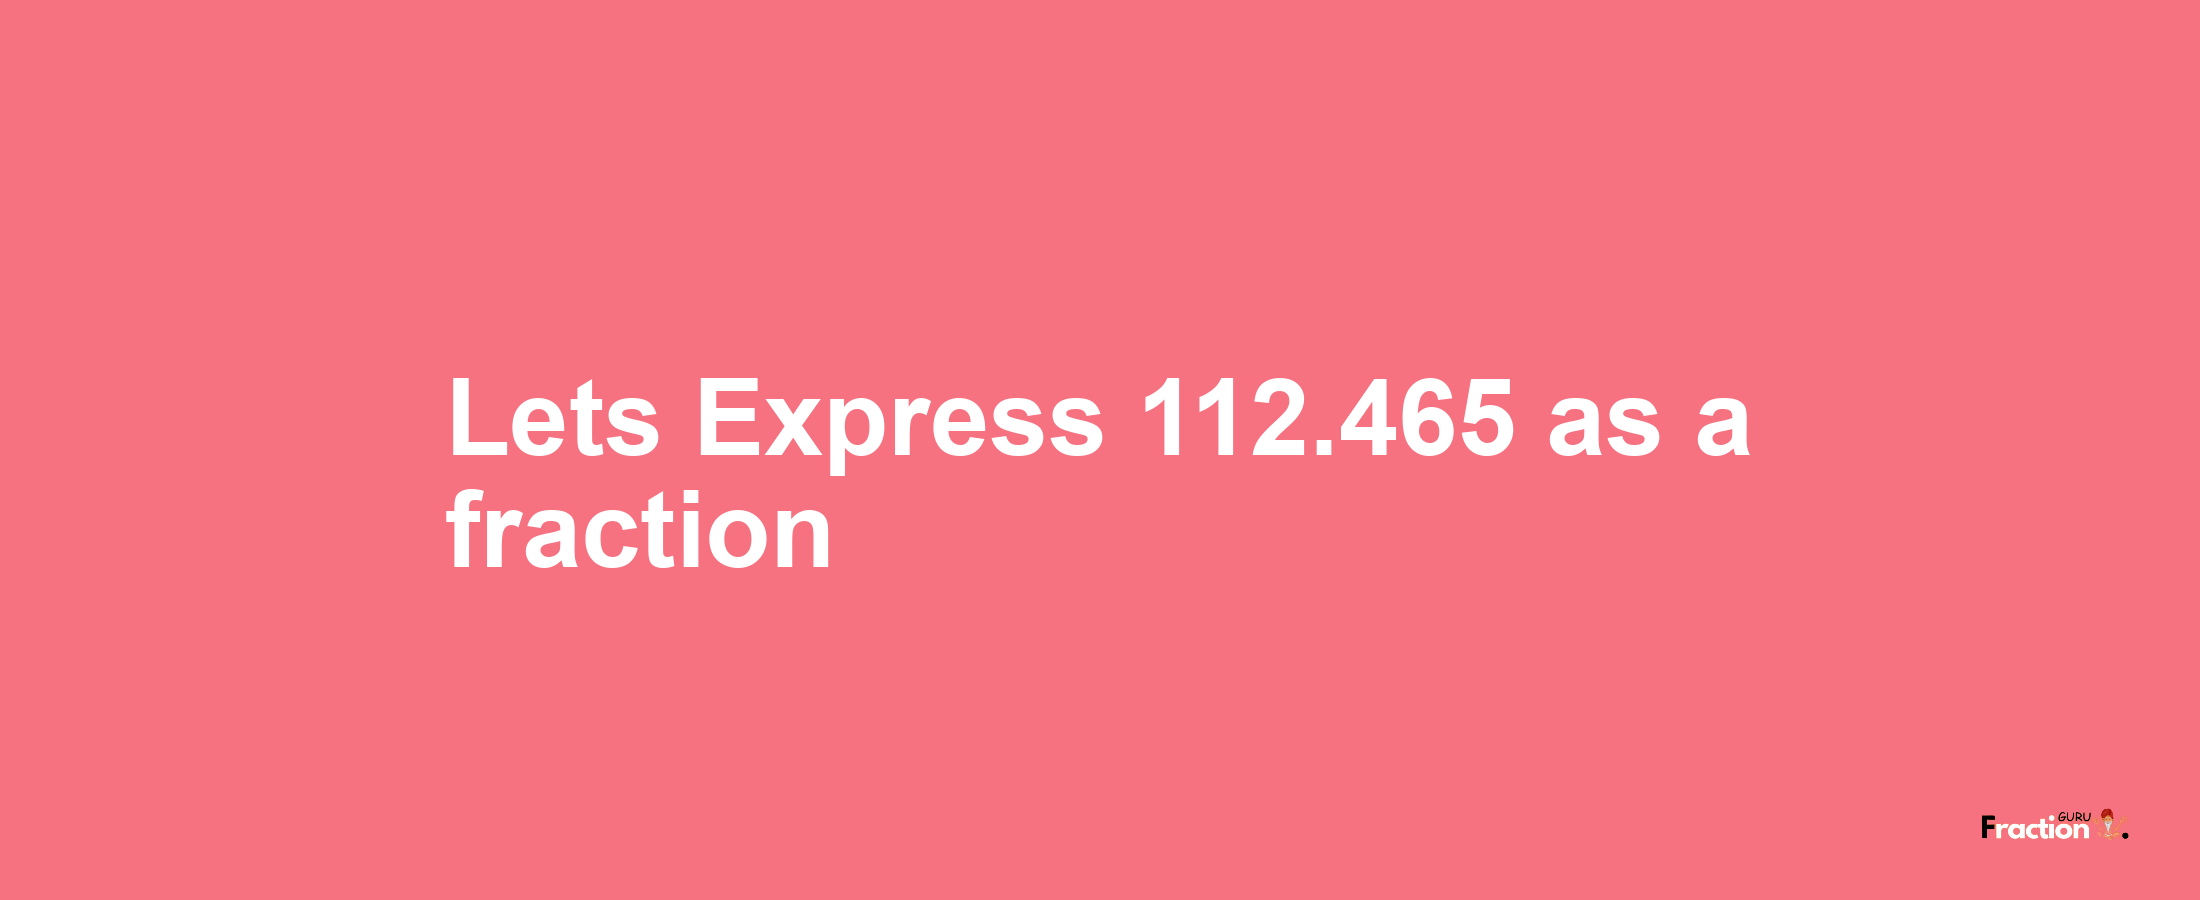 Lets Express 112.465 as afraction